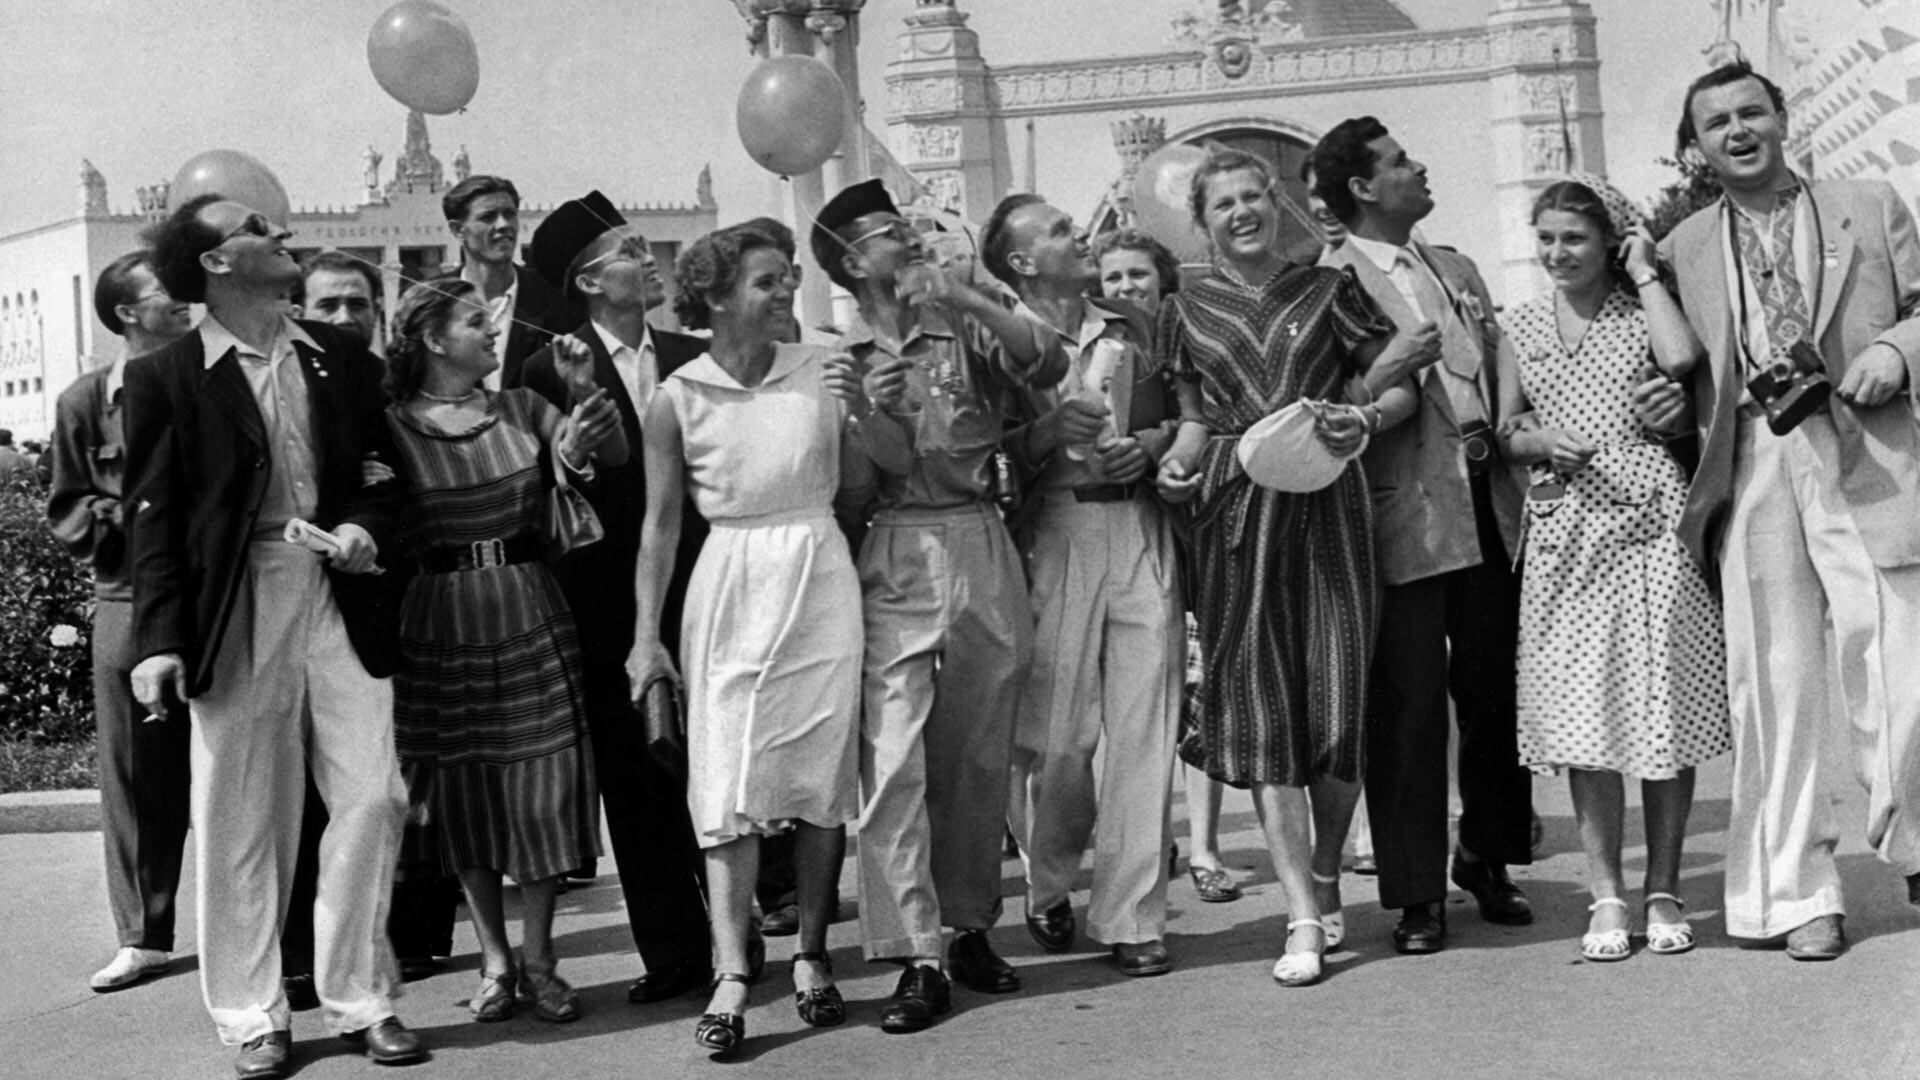 The delegates of the 6th World Festival of Youth and Students, Moscow, 1957